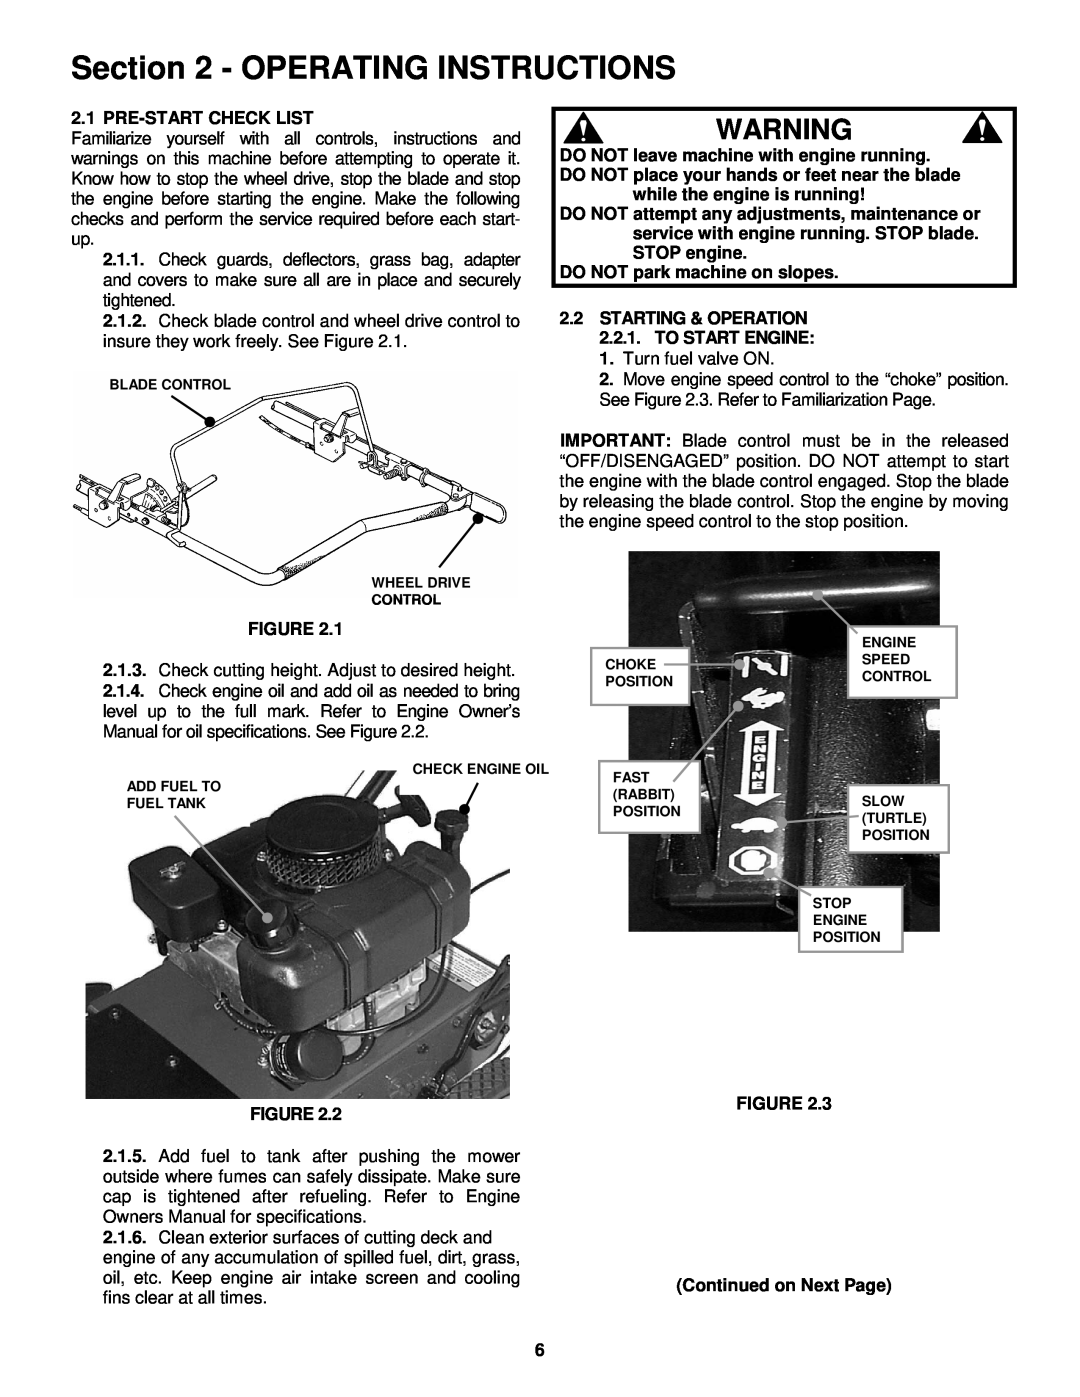 Snapper HWPS26600RV Operating Instructions, Pre-Start Check List, while the engine is running, Continued on Next Page 